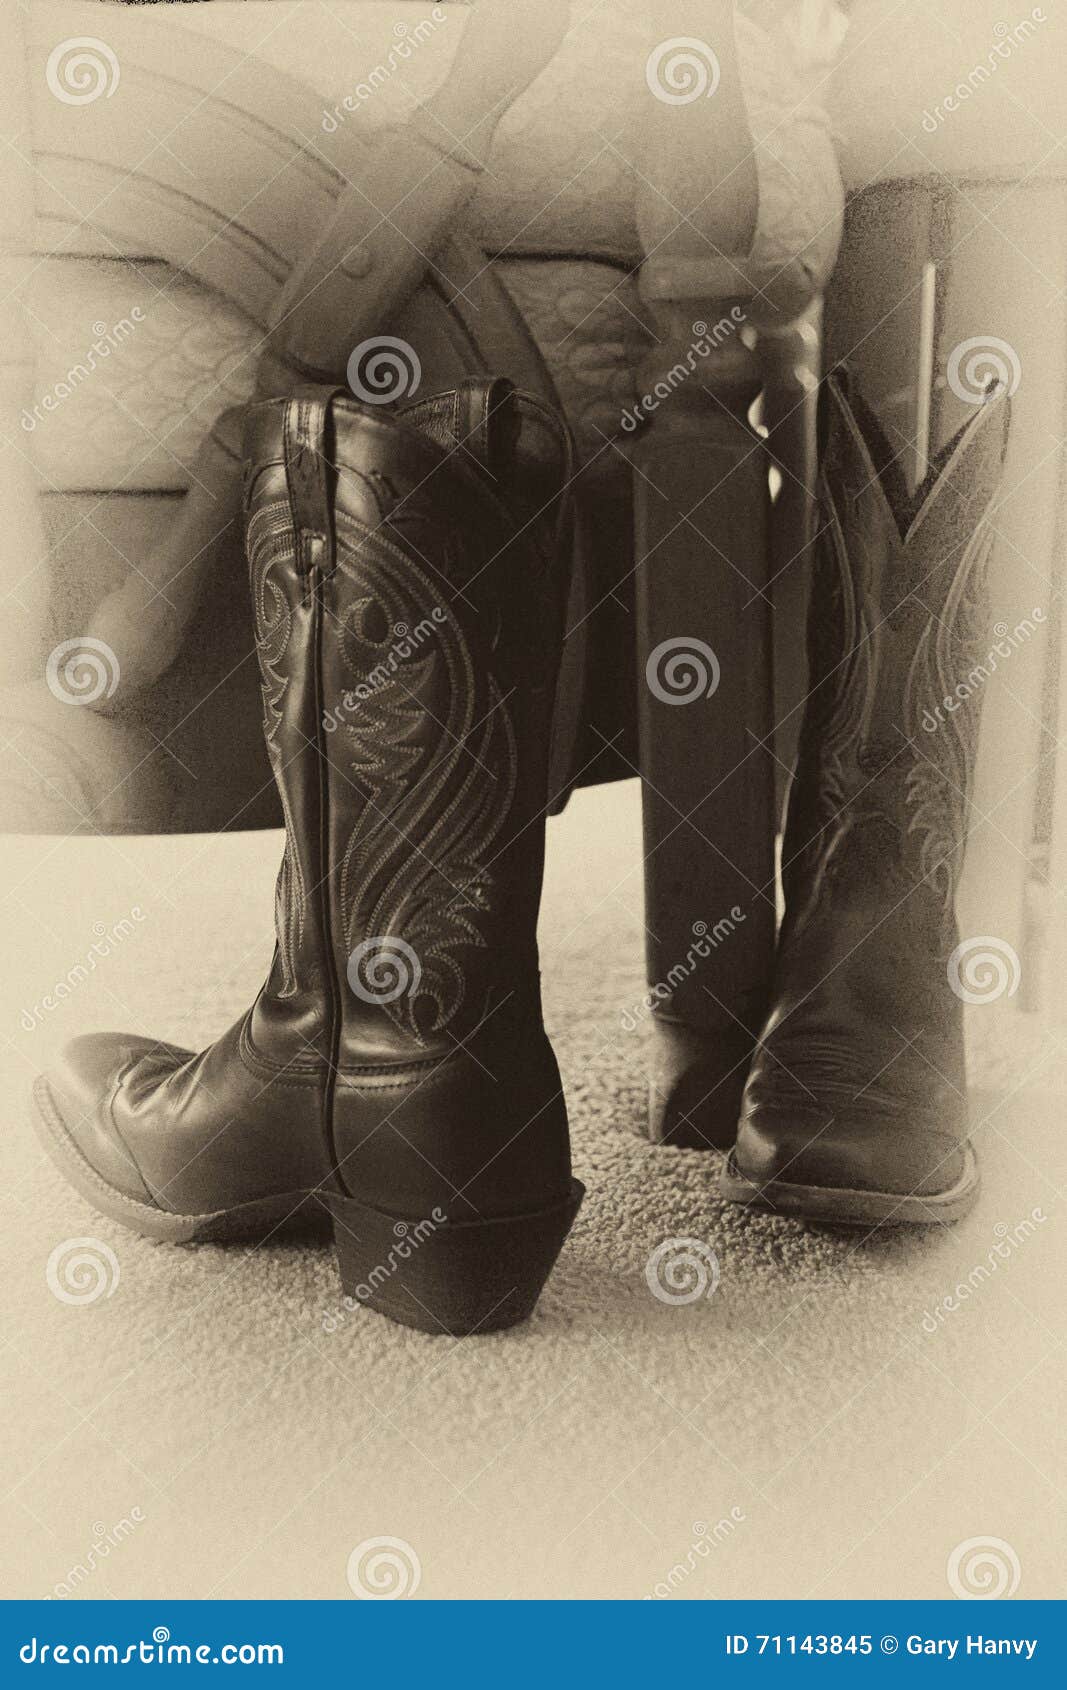 Elaborately Stitched Cowboy Boots By Chair Stock Image Image Of